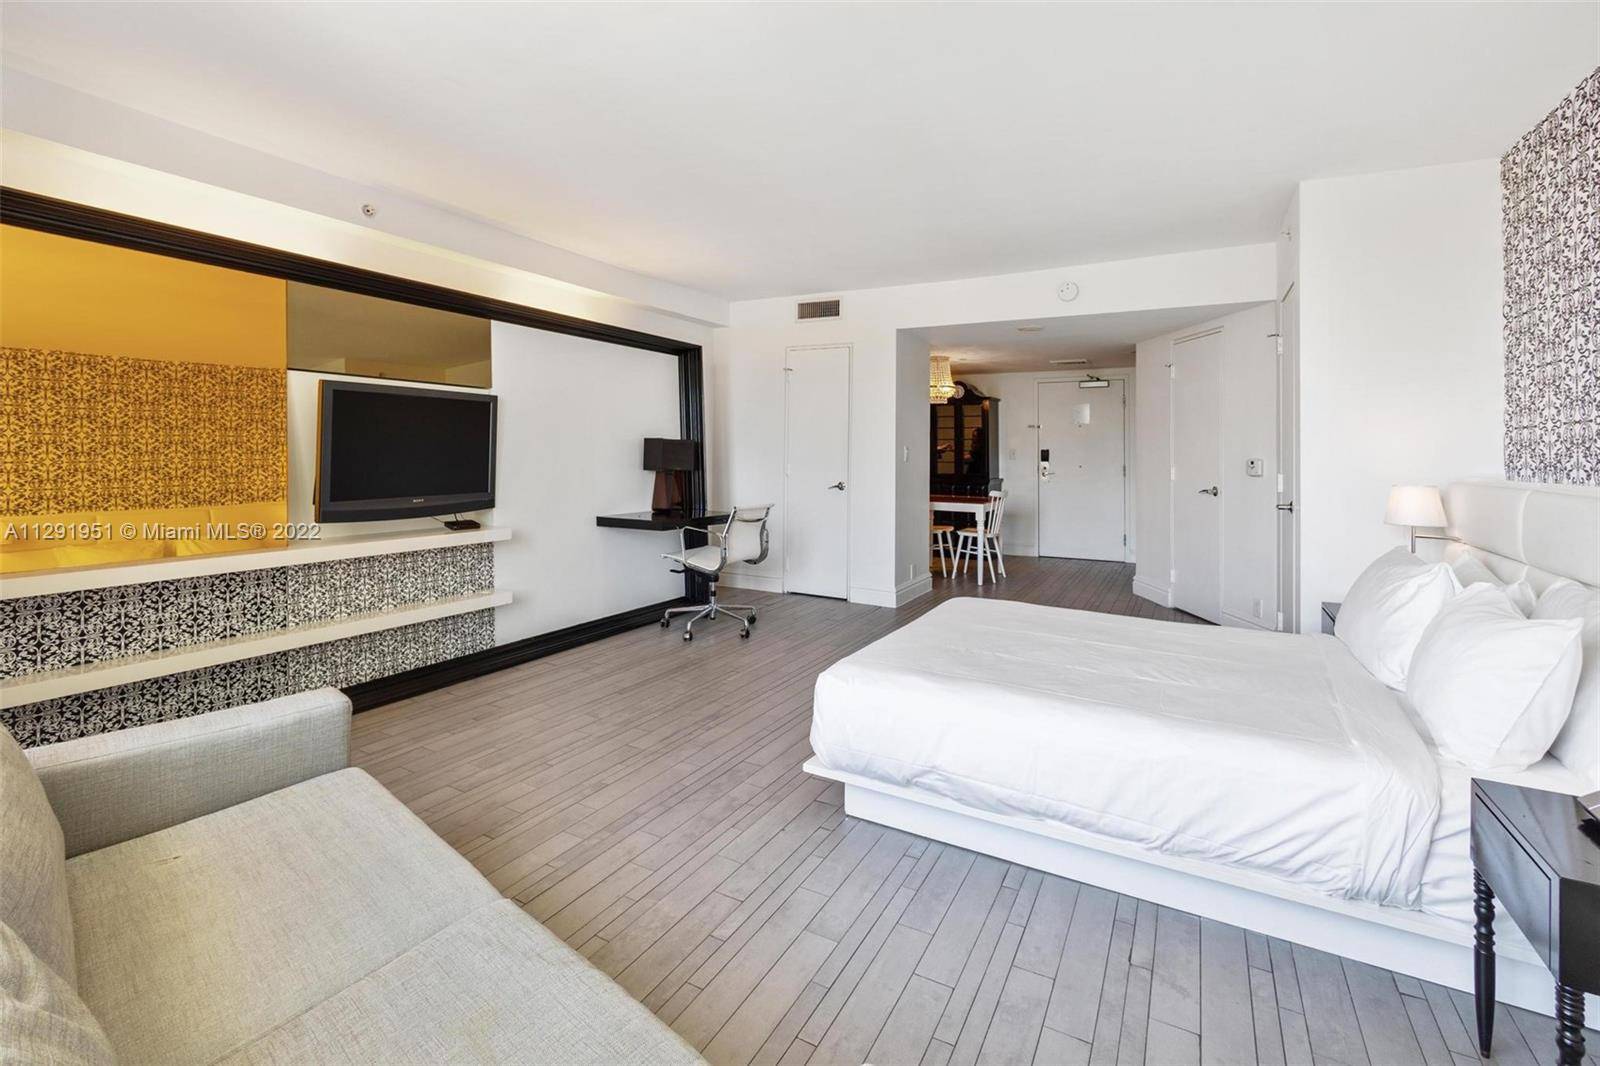 Great Opportunity to own, live or rent a beautiful studio at the very chic Mondrian Hotel.